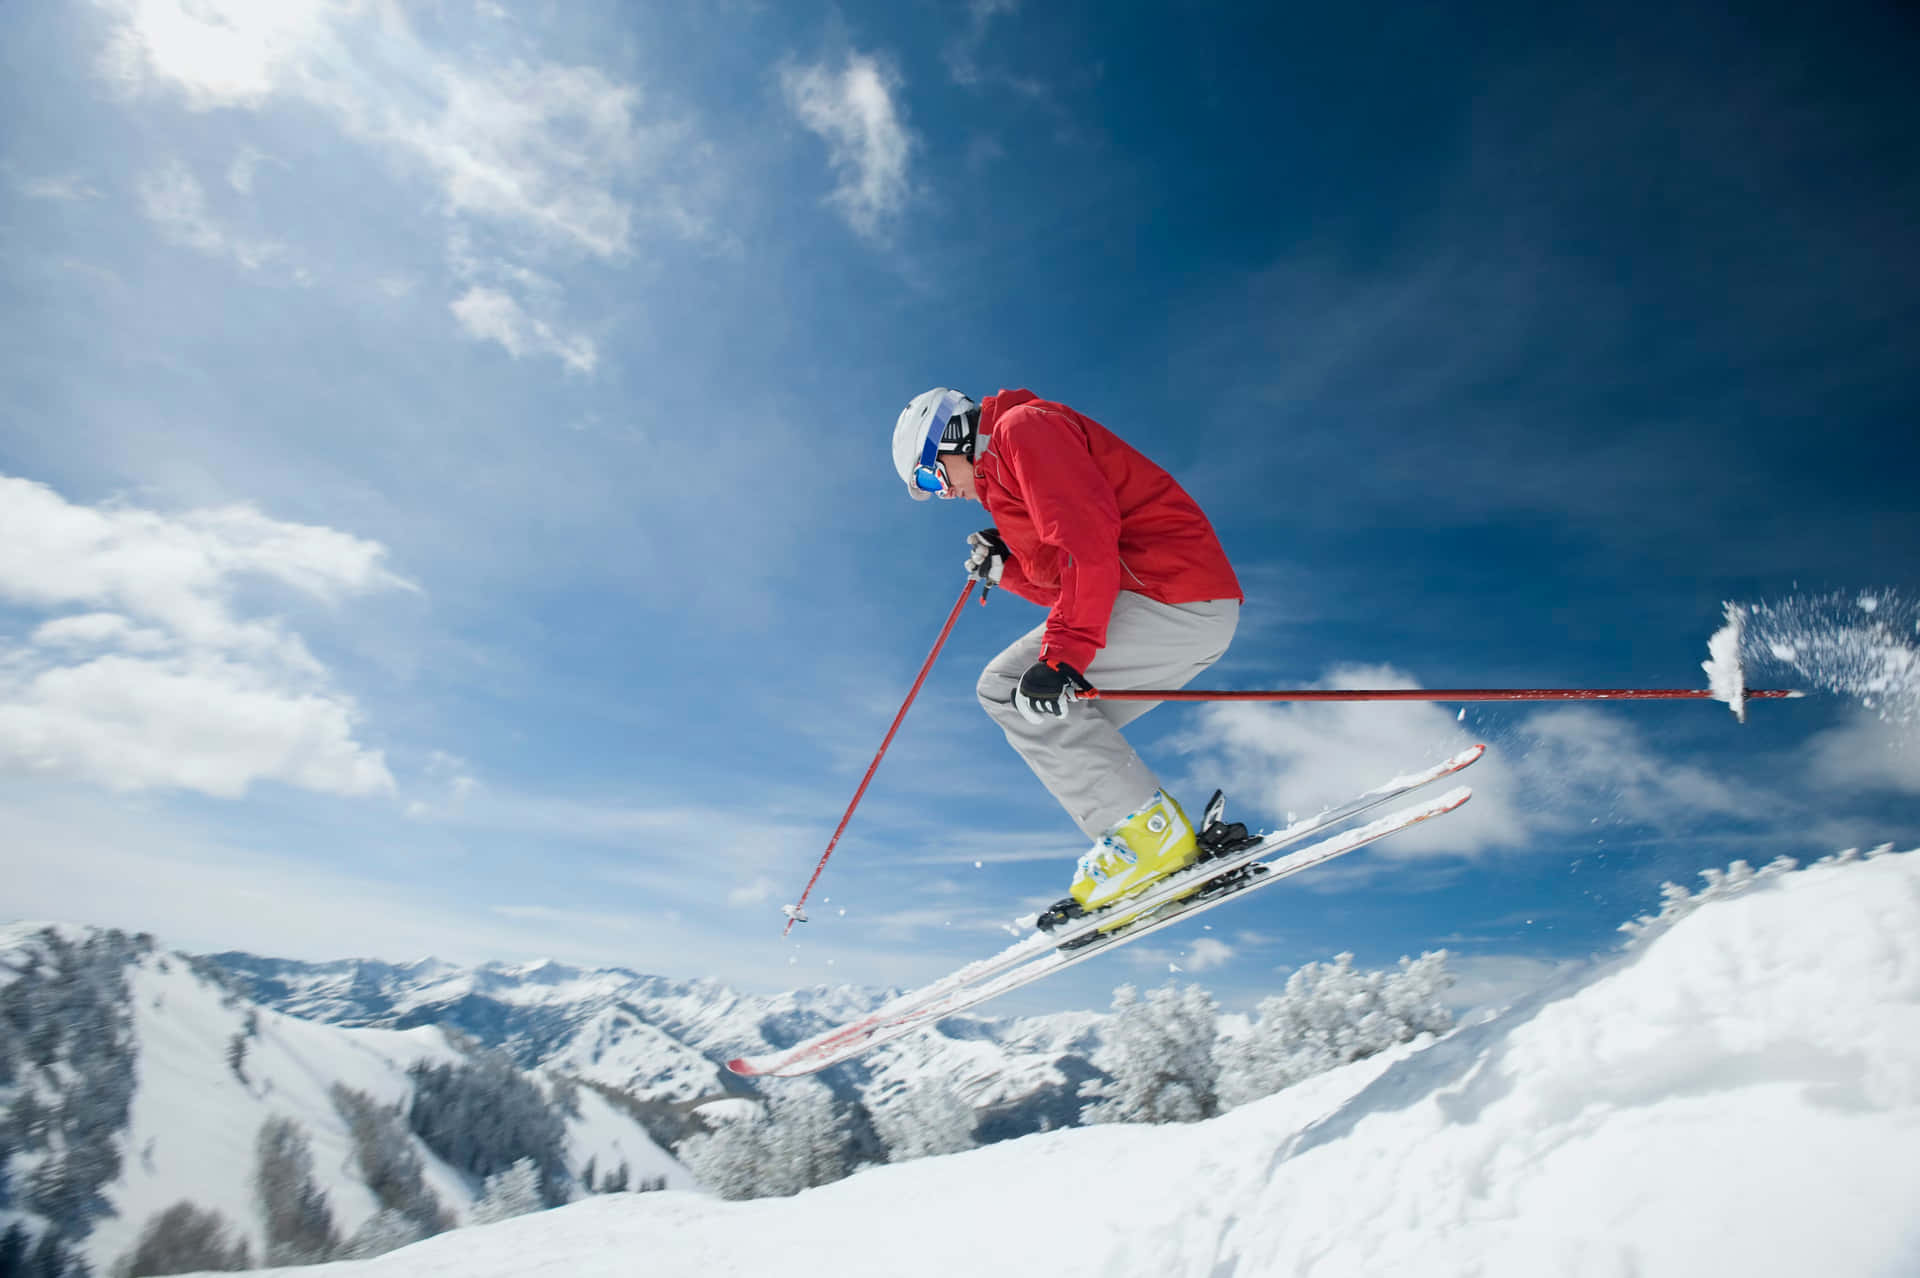 Embrace the joy of skiing in the beautiful alpine landscape